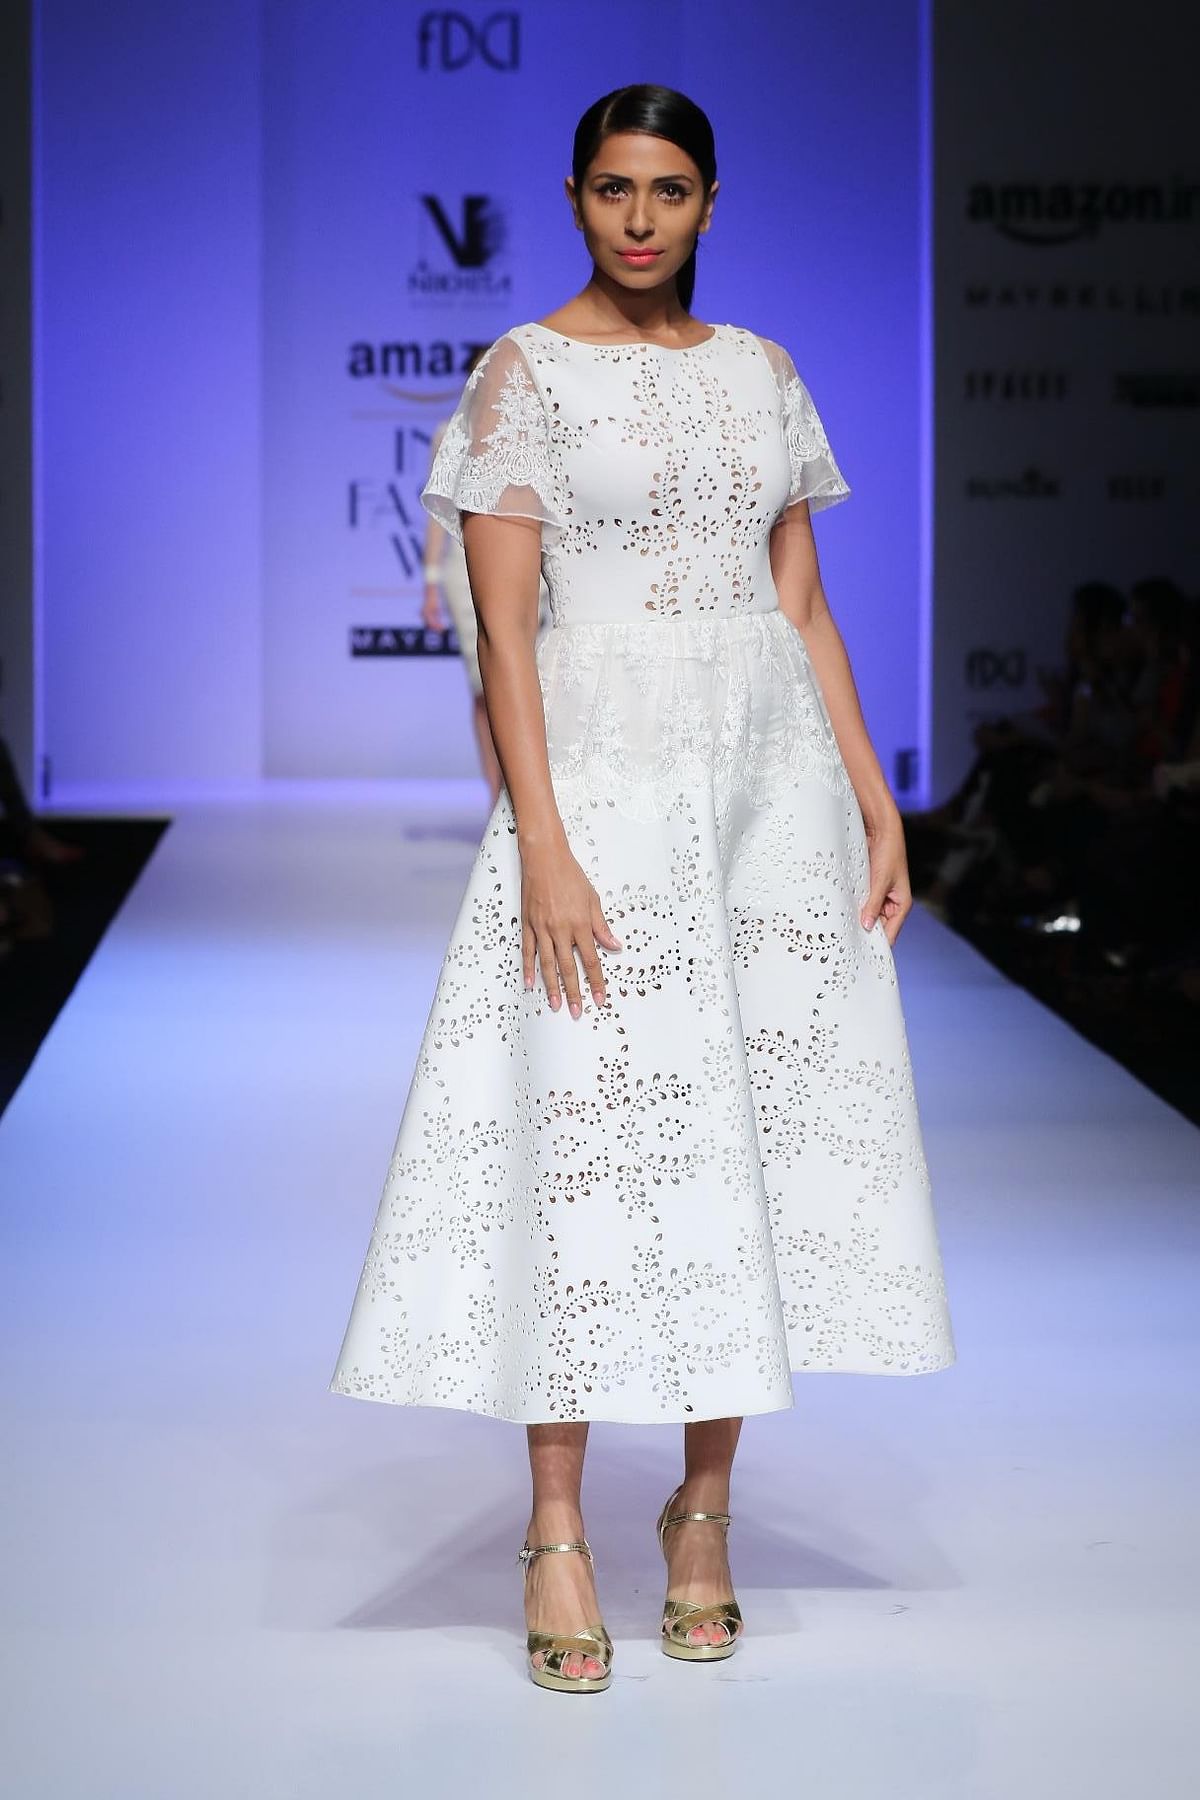 Day 3 at the Amazon India Fashion Week stood testimony to the fact that white will never go out of style.